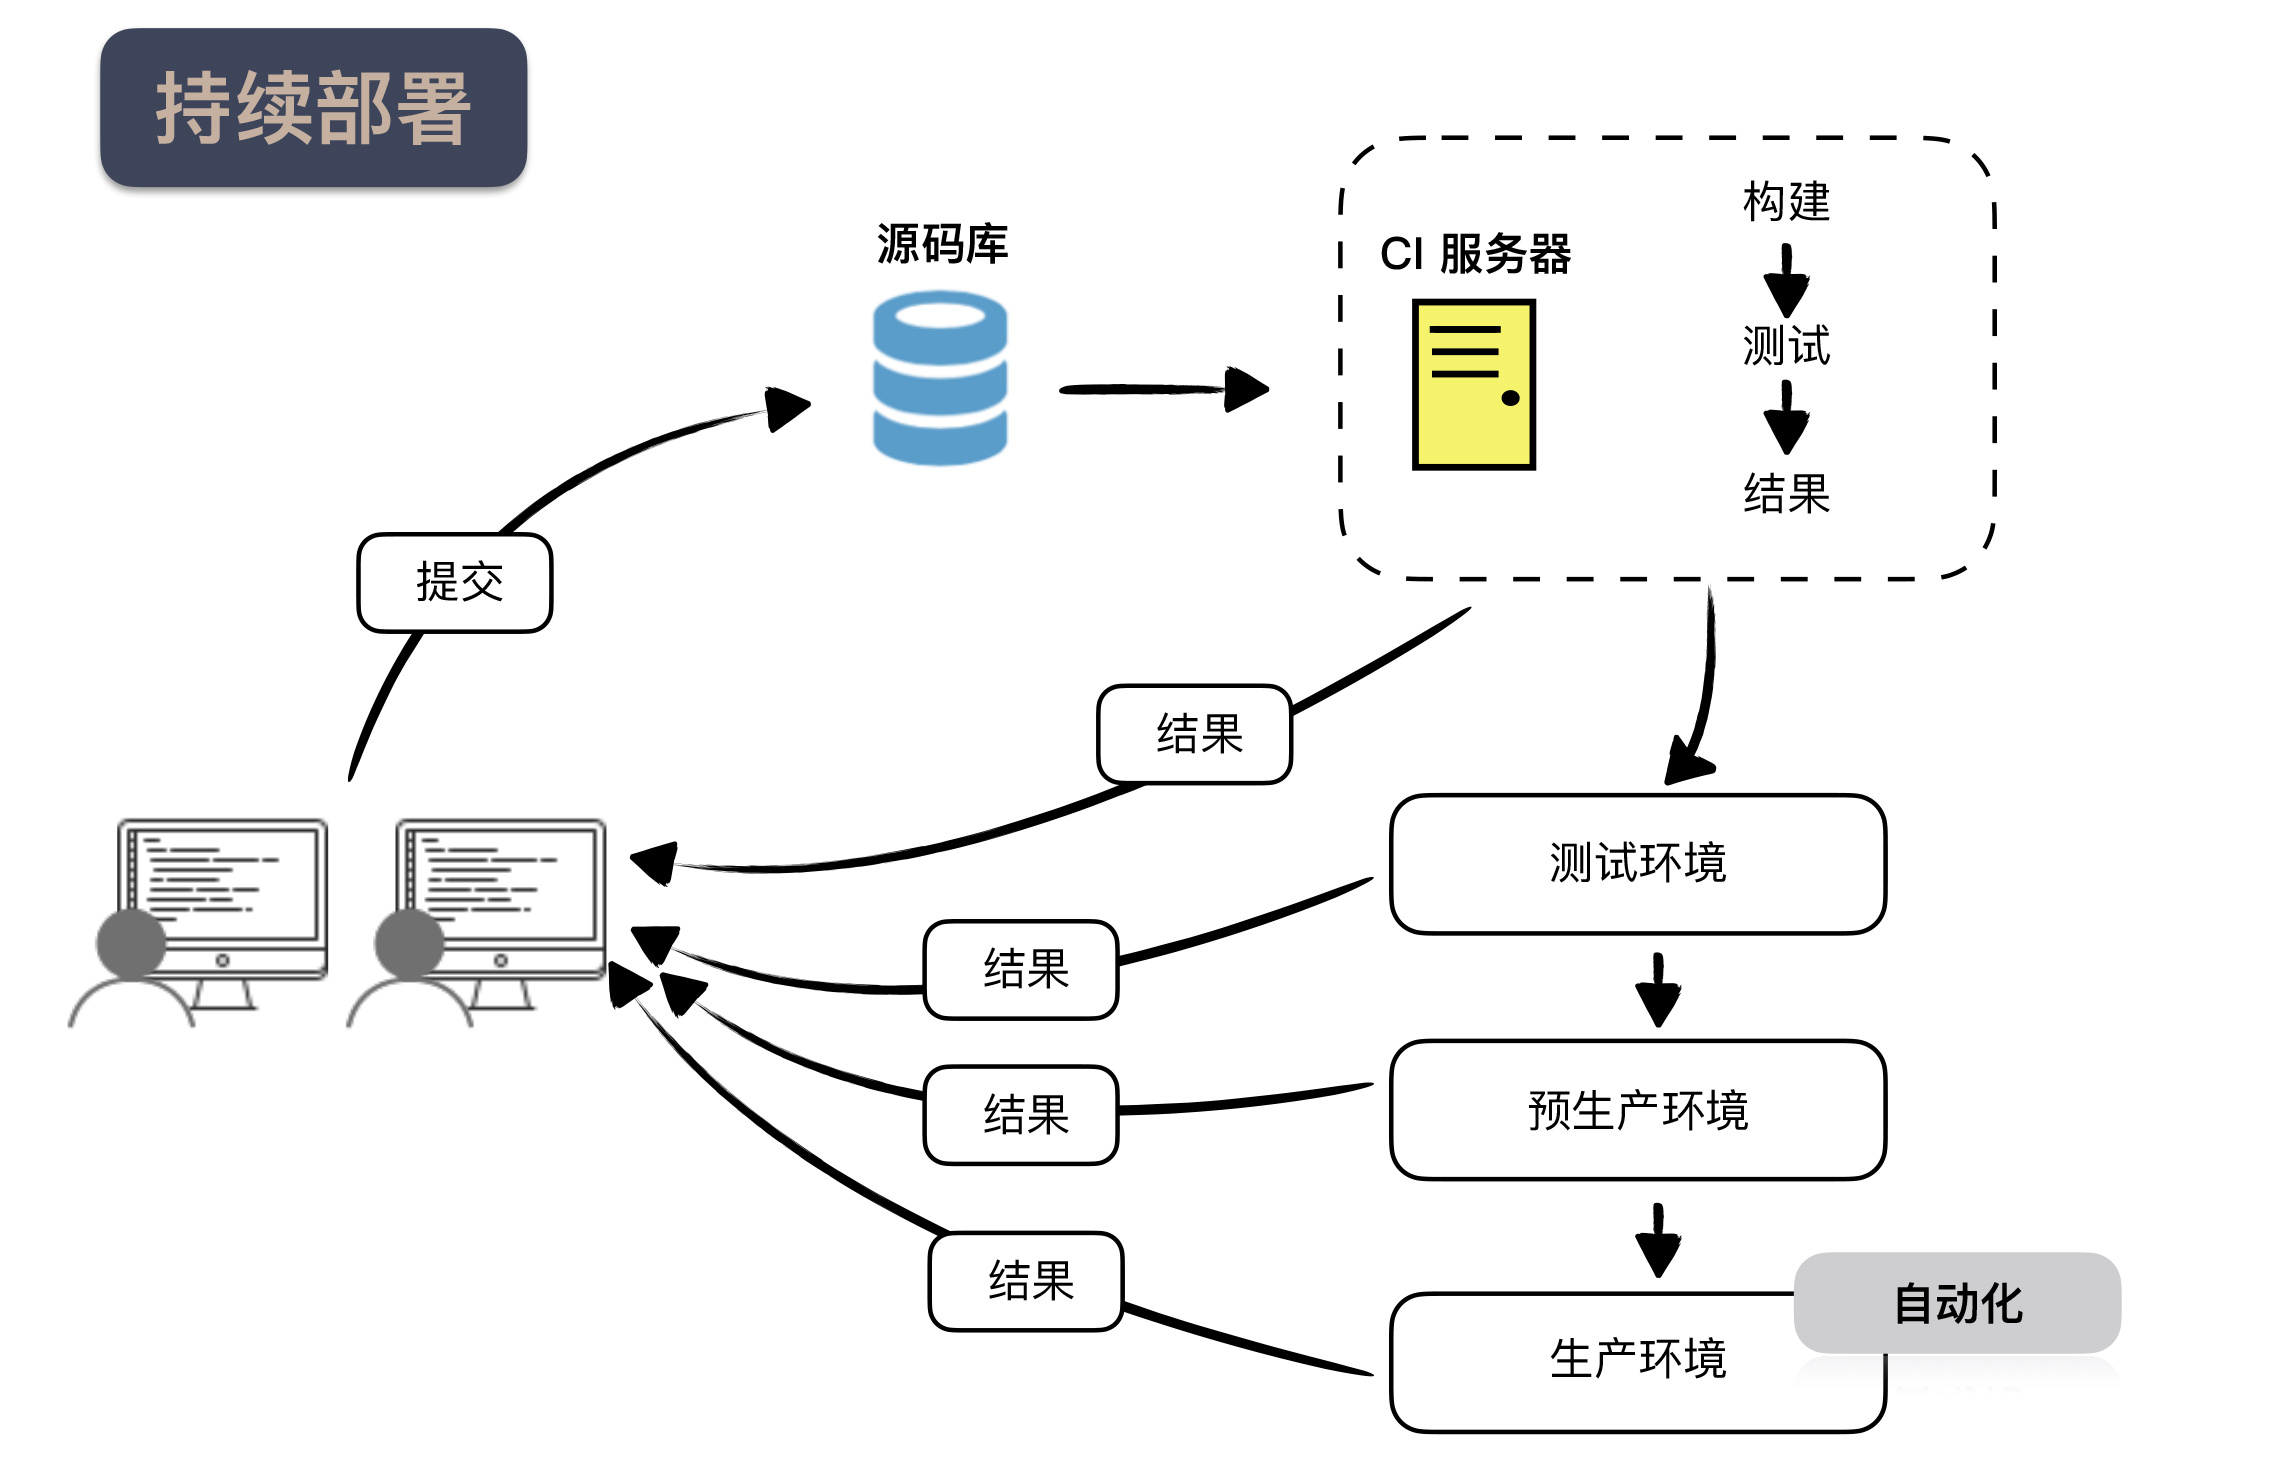 https://img.zhaoweiguo.com/knowledge/images/devops/cicds/cicd3.jpeg